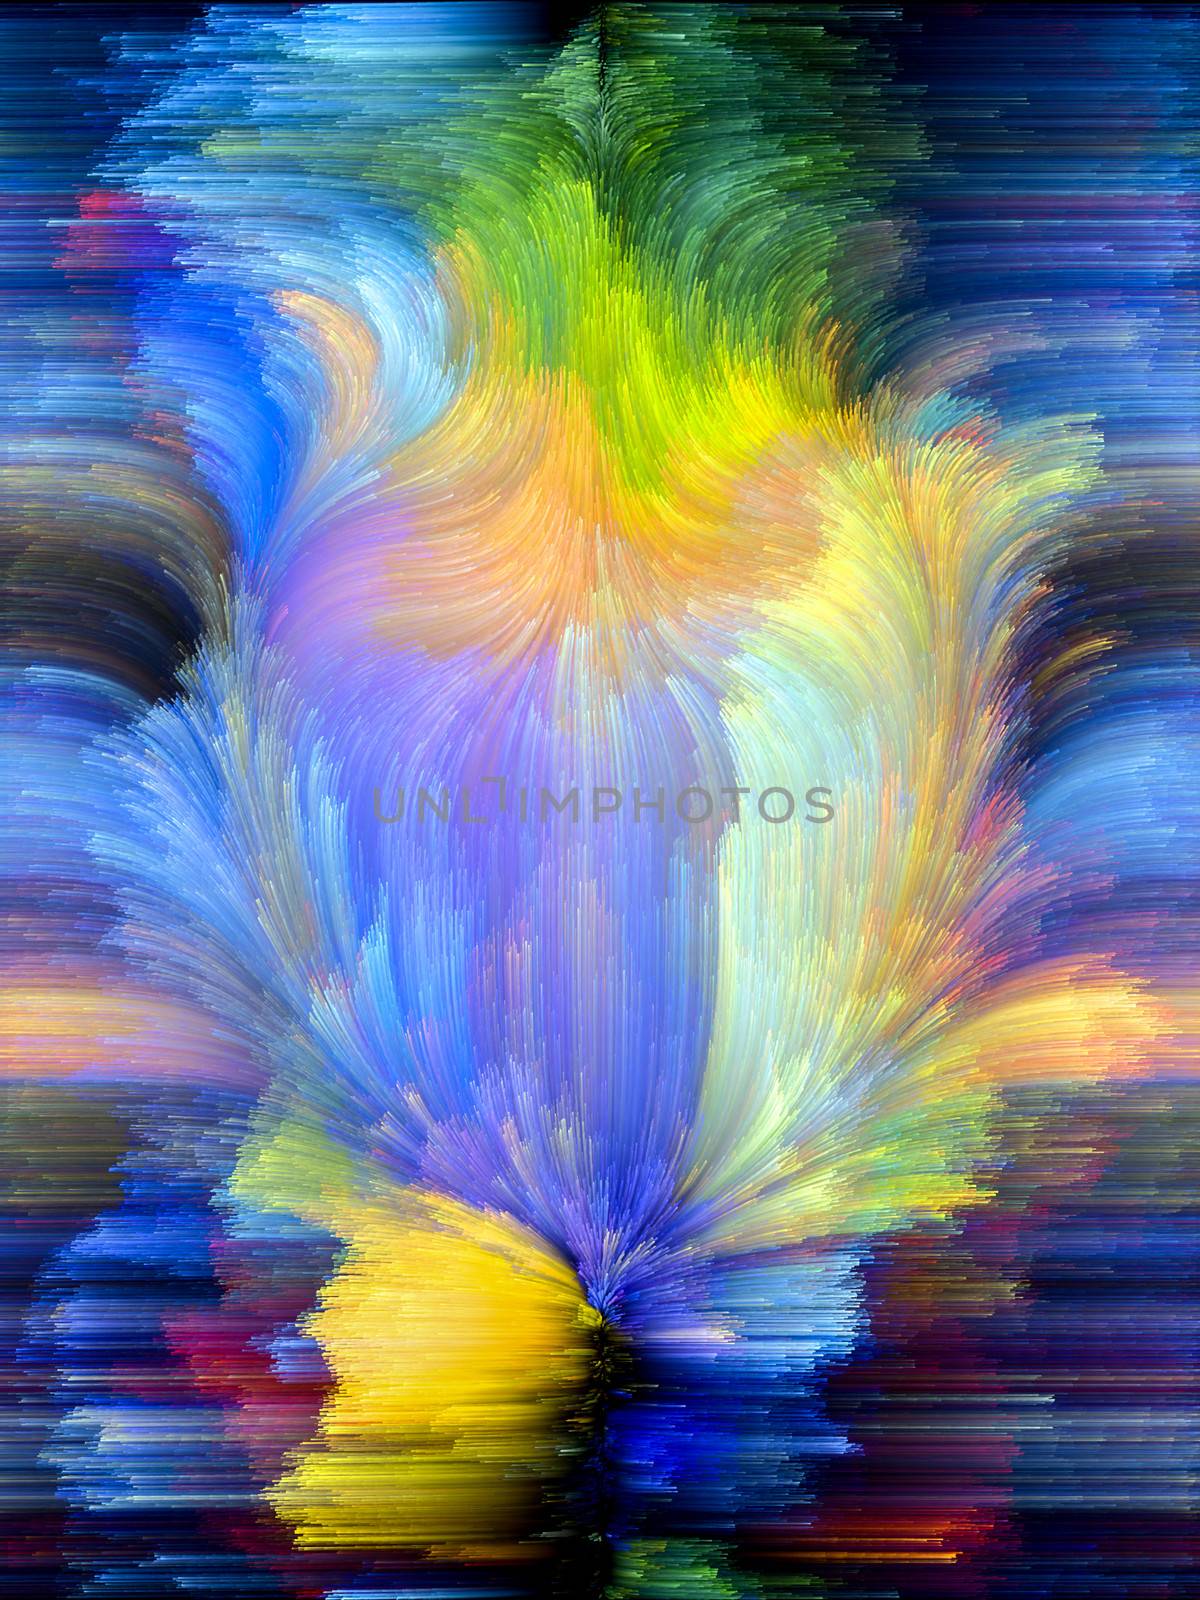 Colors In Bloom series. Backdrop design of fractal color textures to provide supporting composition for works on imagination, creativity and design